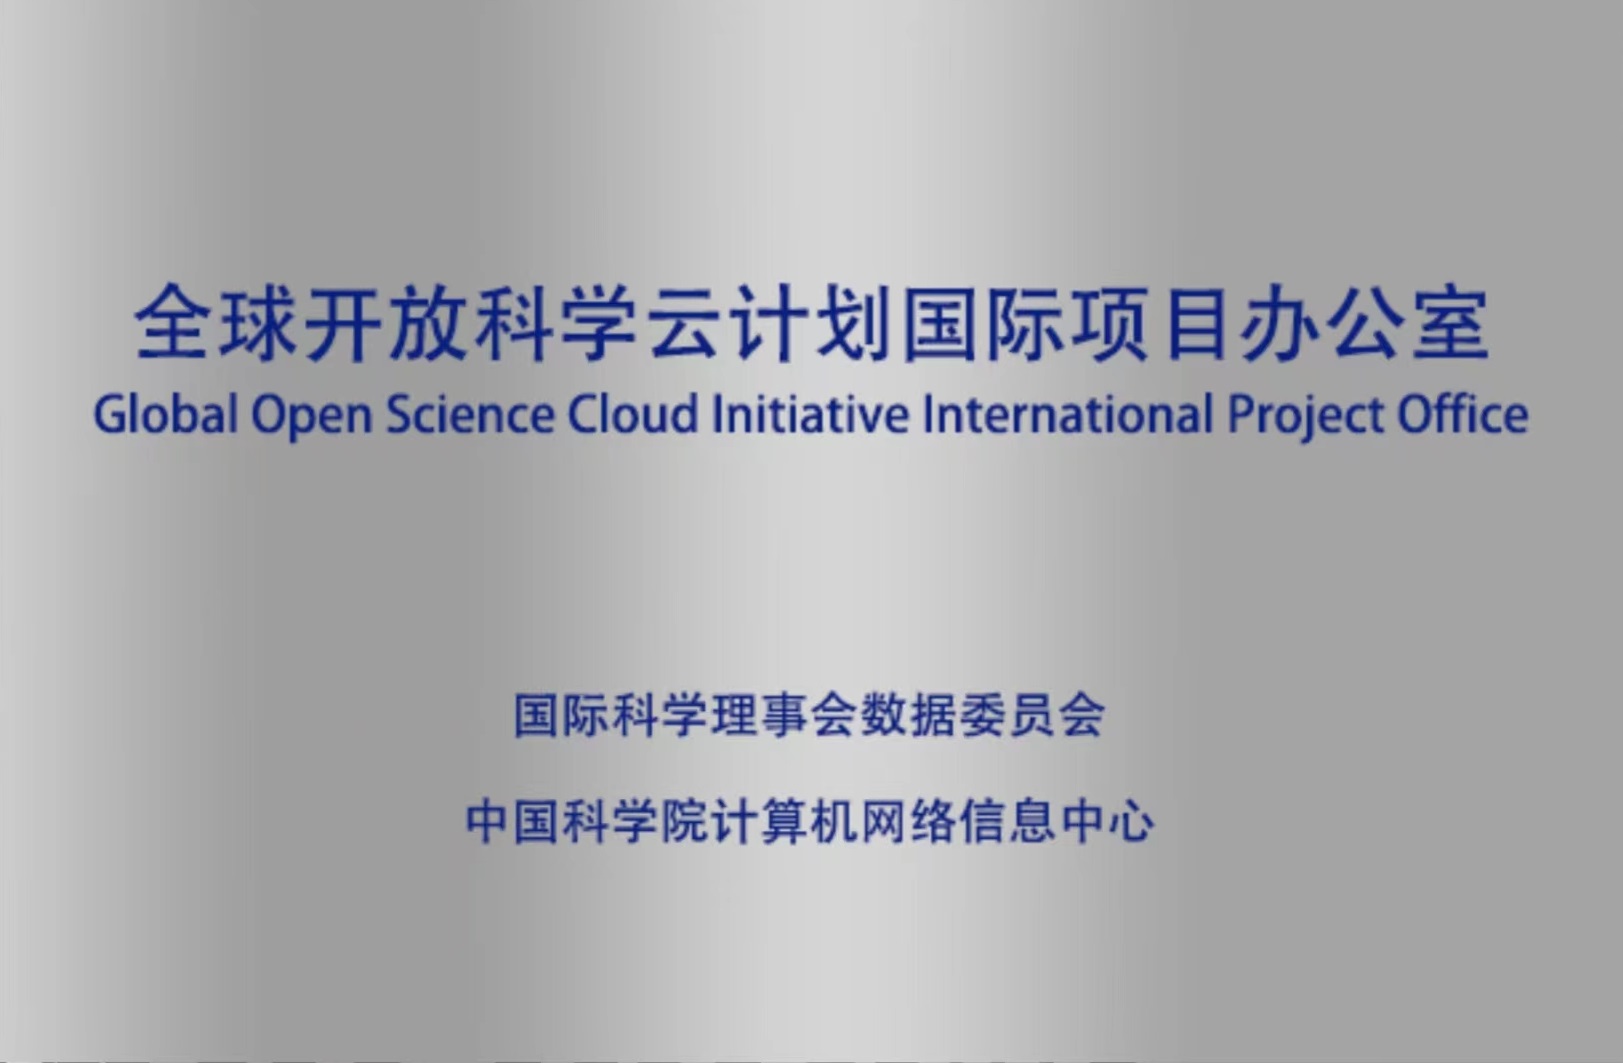 CNIC of the CAS to Host International Programme Office for the Global Open Science Cloud Initiative